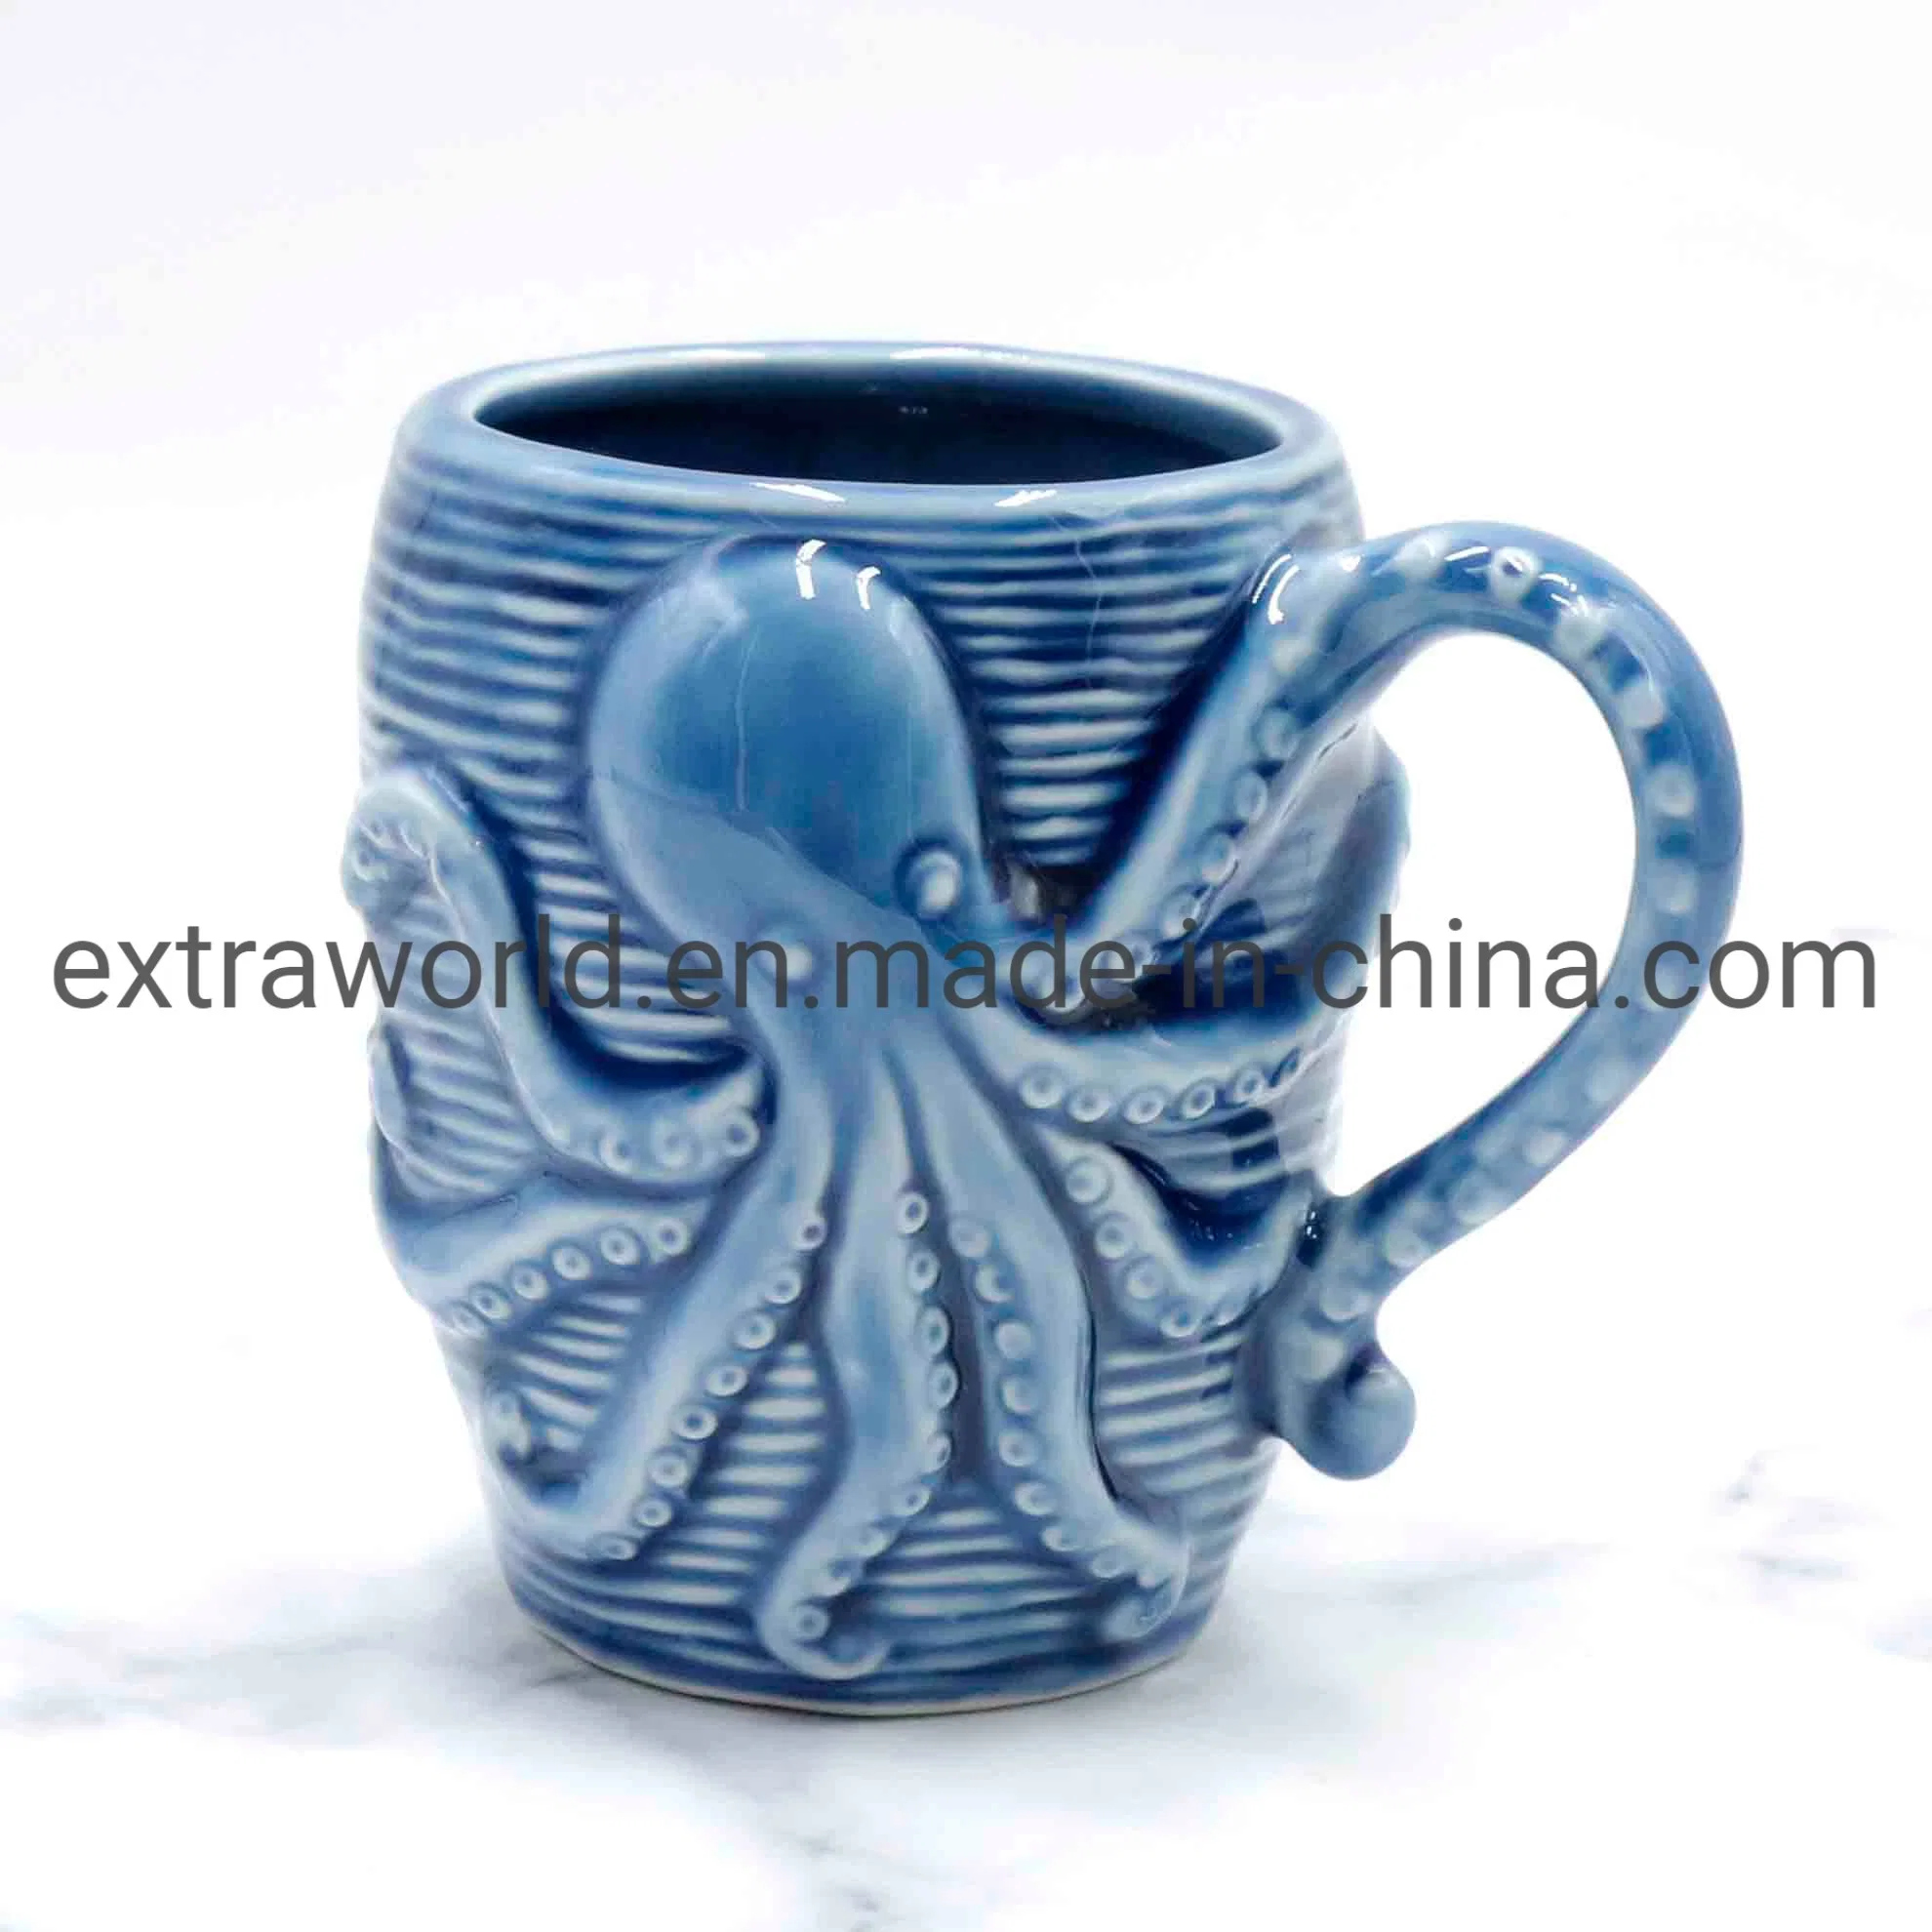 Porcelain Pottery Hand Made Daily Use 3D Sea Animal Octopus Promotion Gift Mug